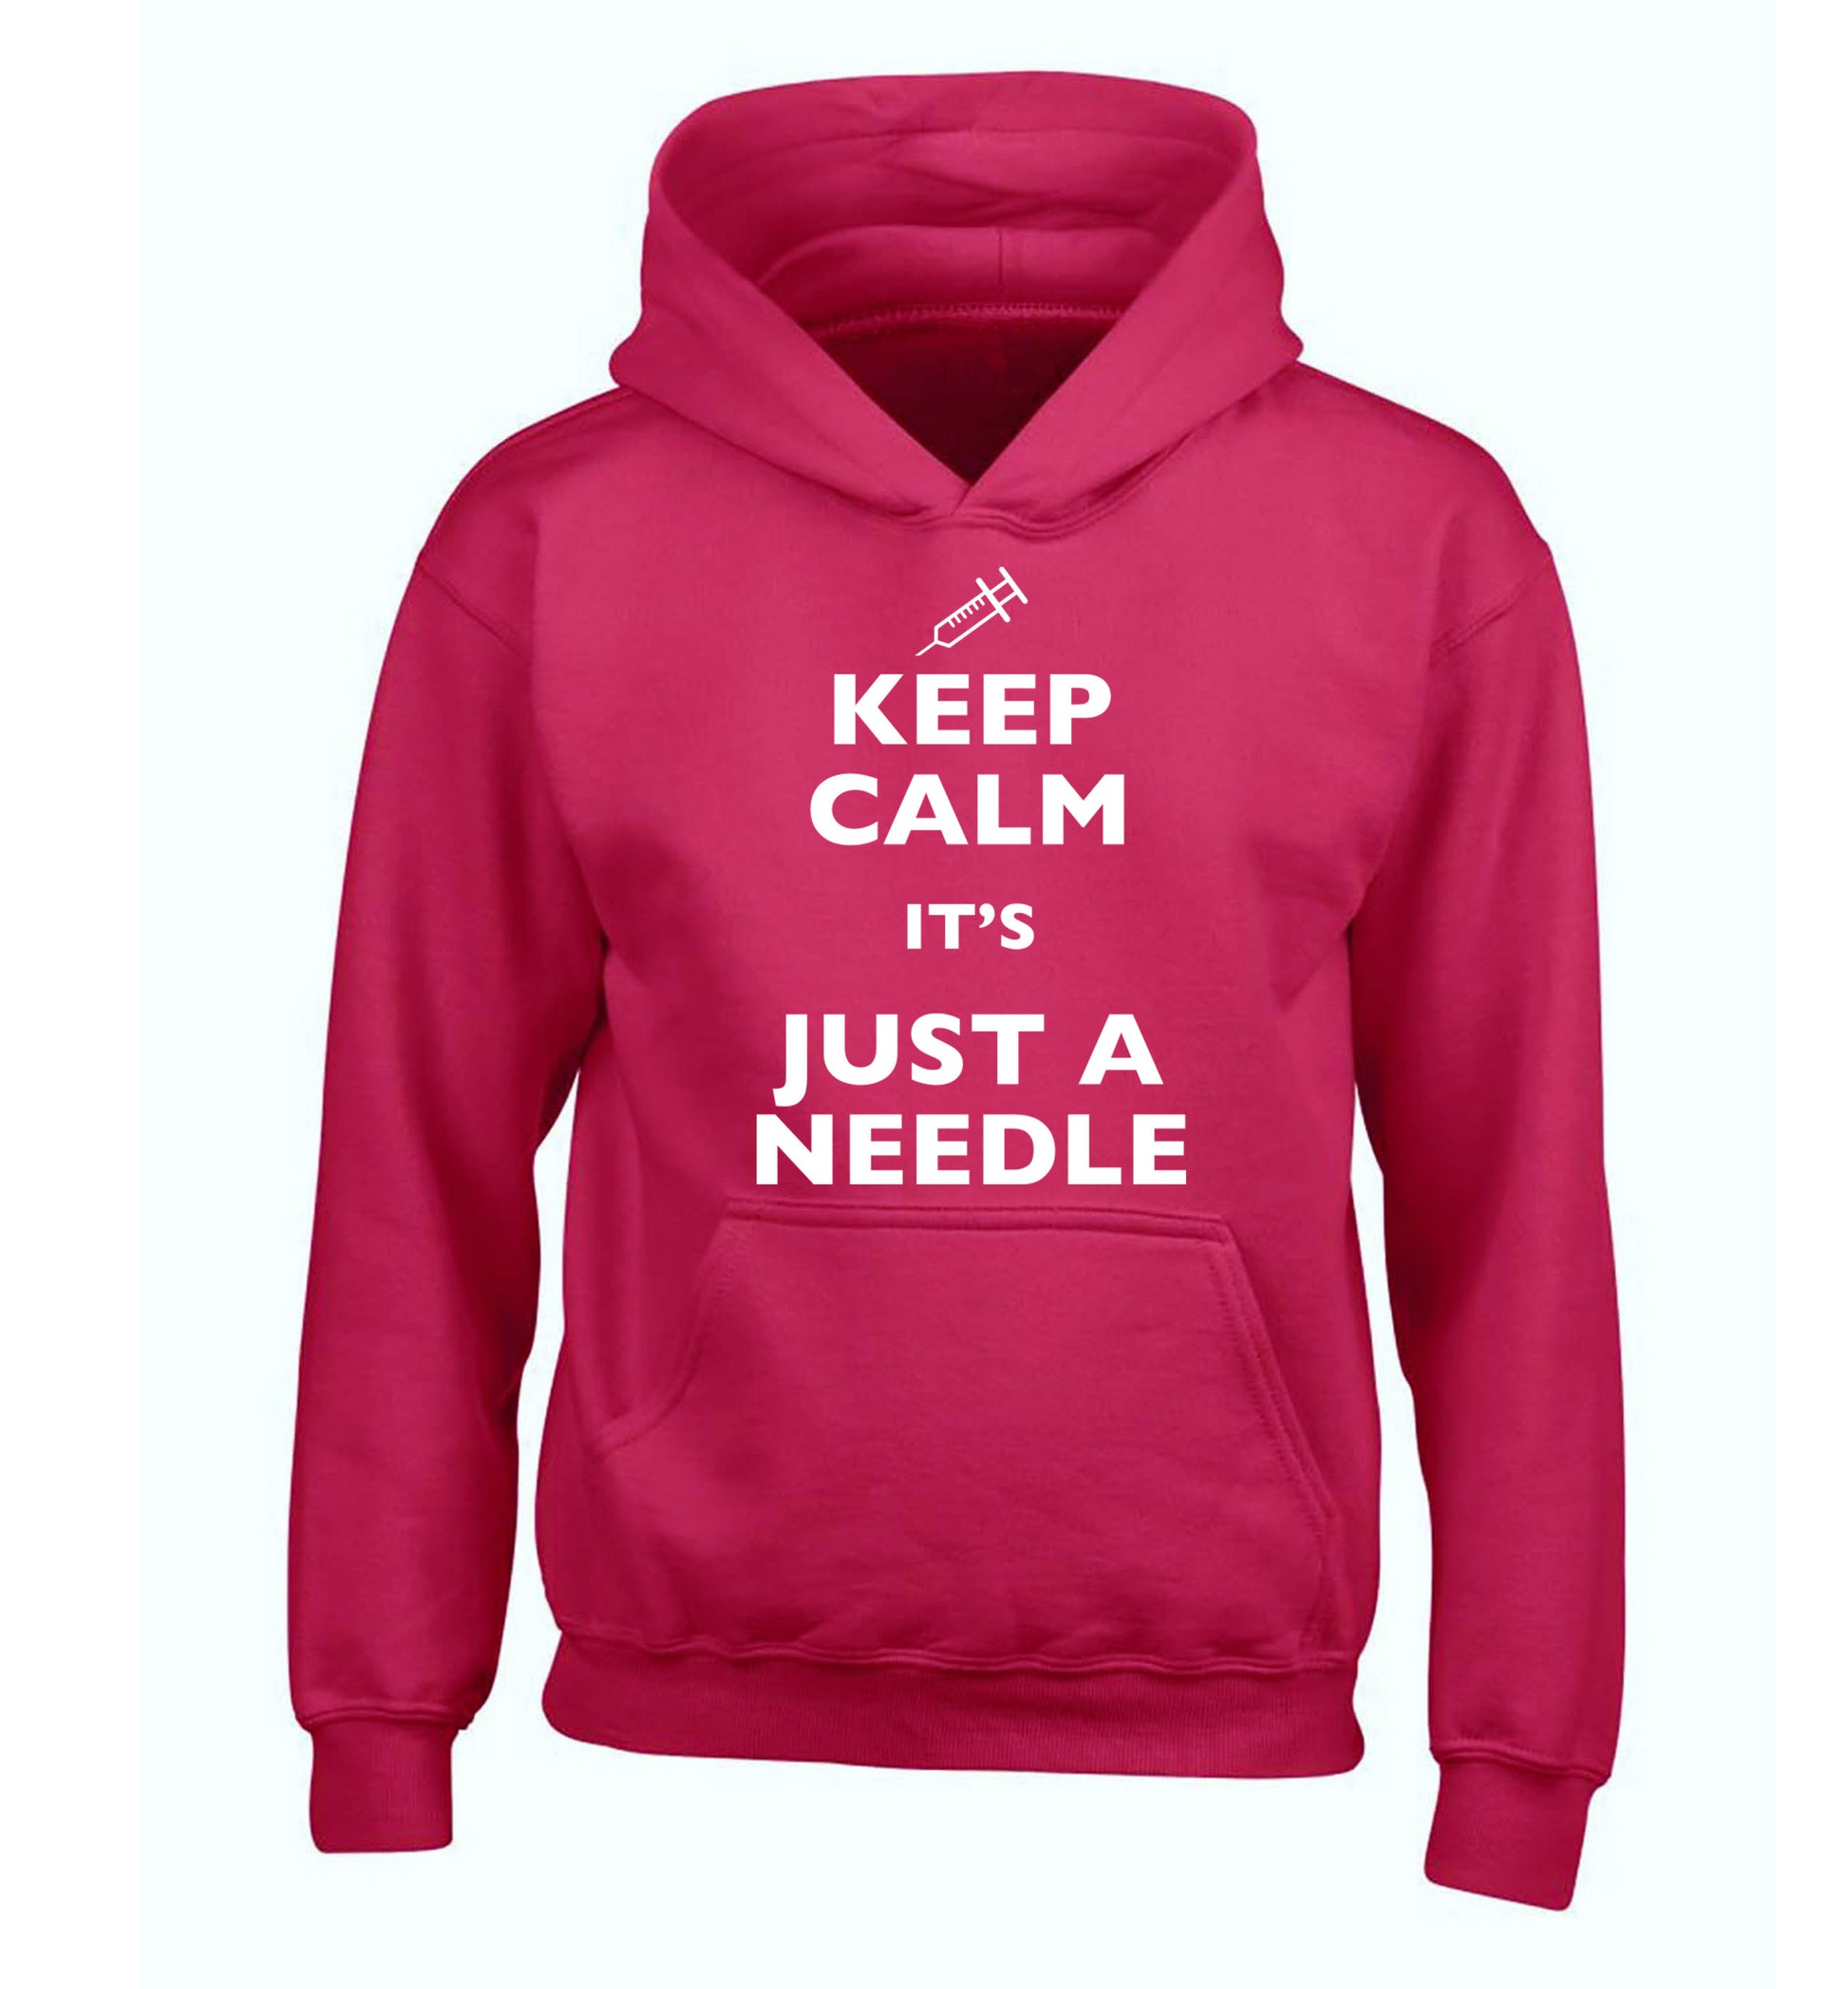 Keep calm it's only a needle children's pink hoodie 12-14 Years